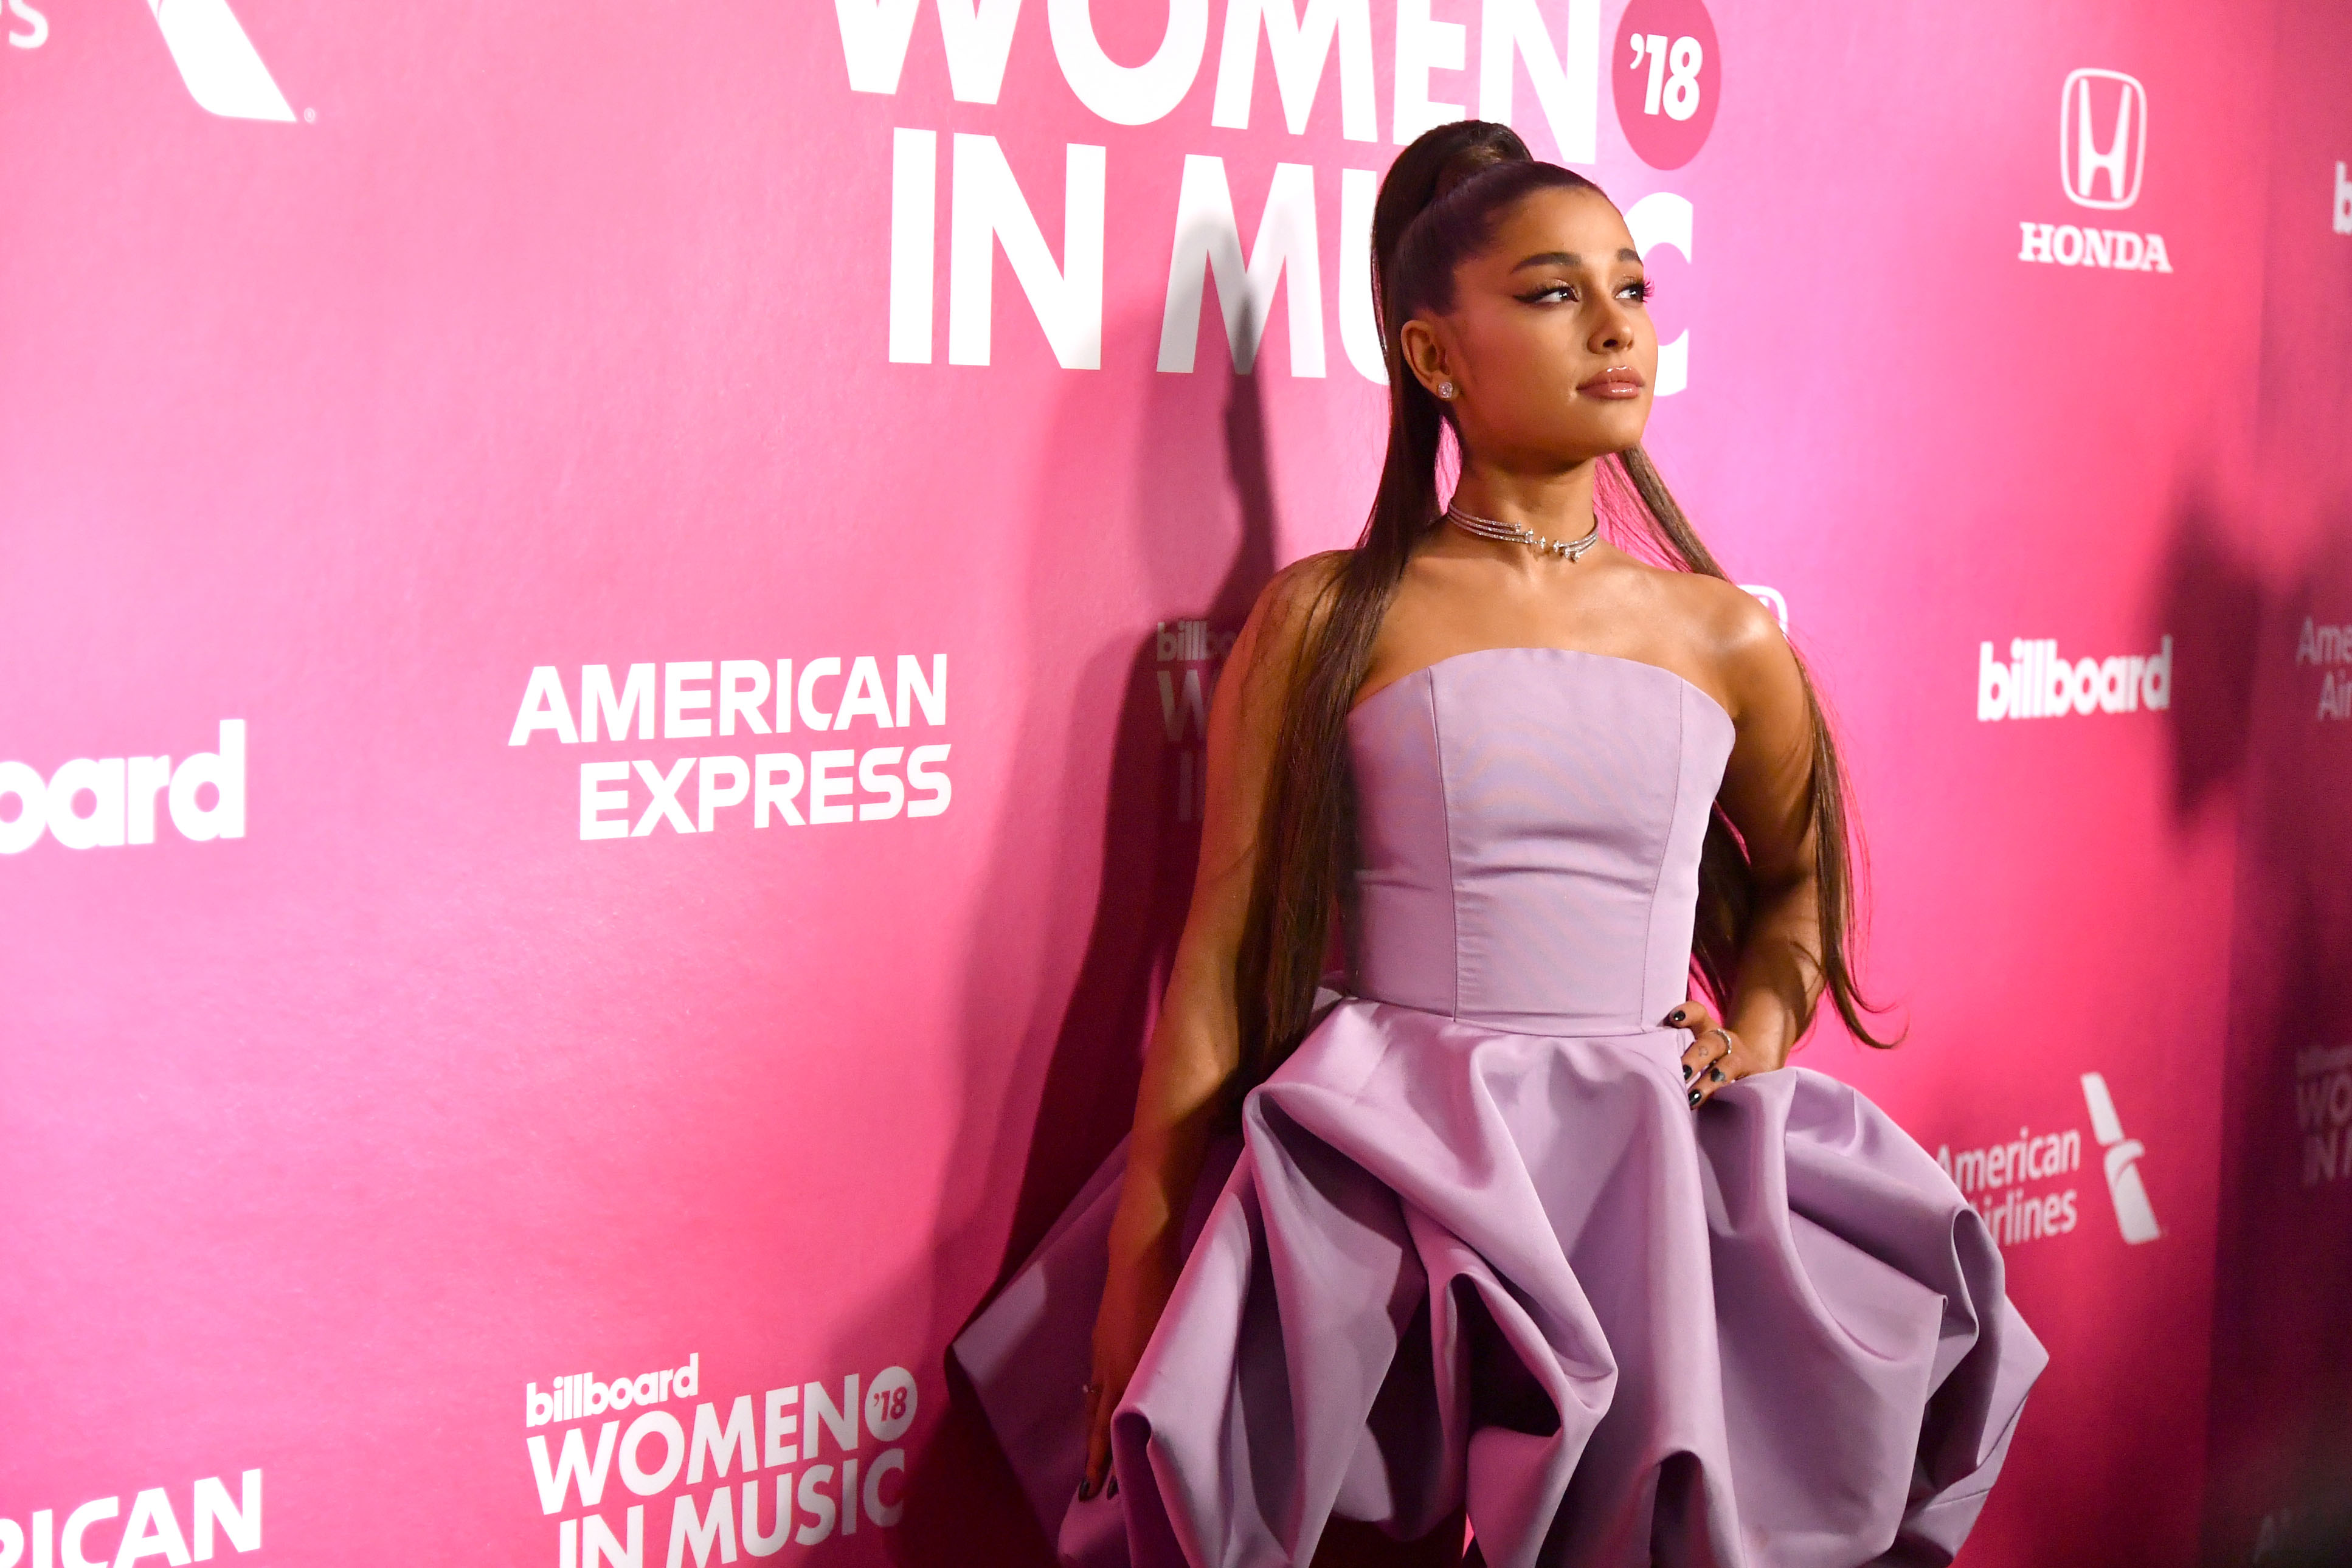 Hermès Sales Are Up, Ariana Grande Comments On Predatory Photog